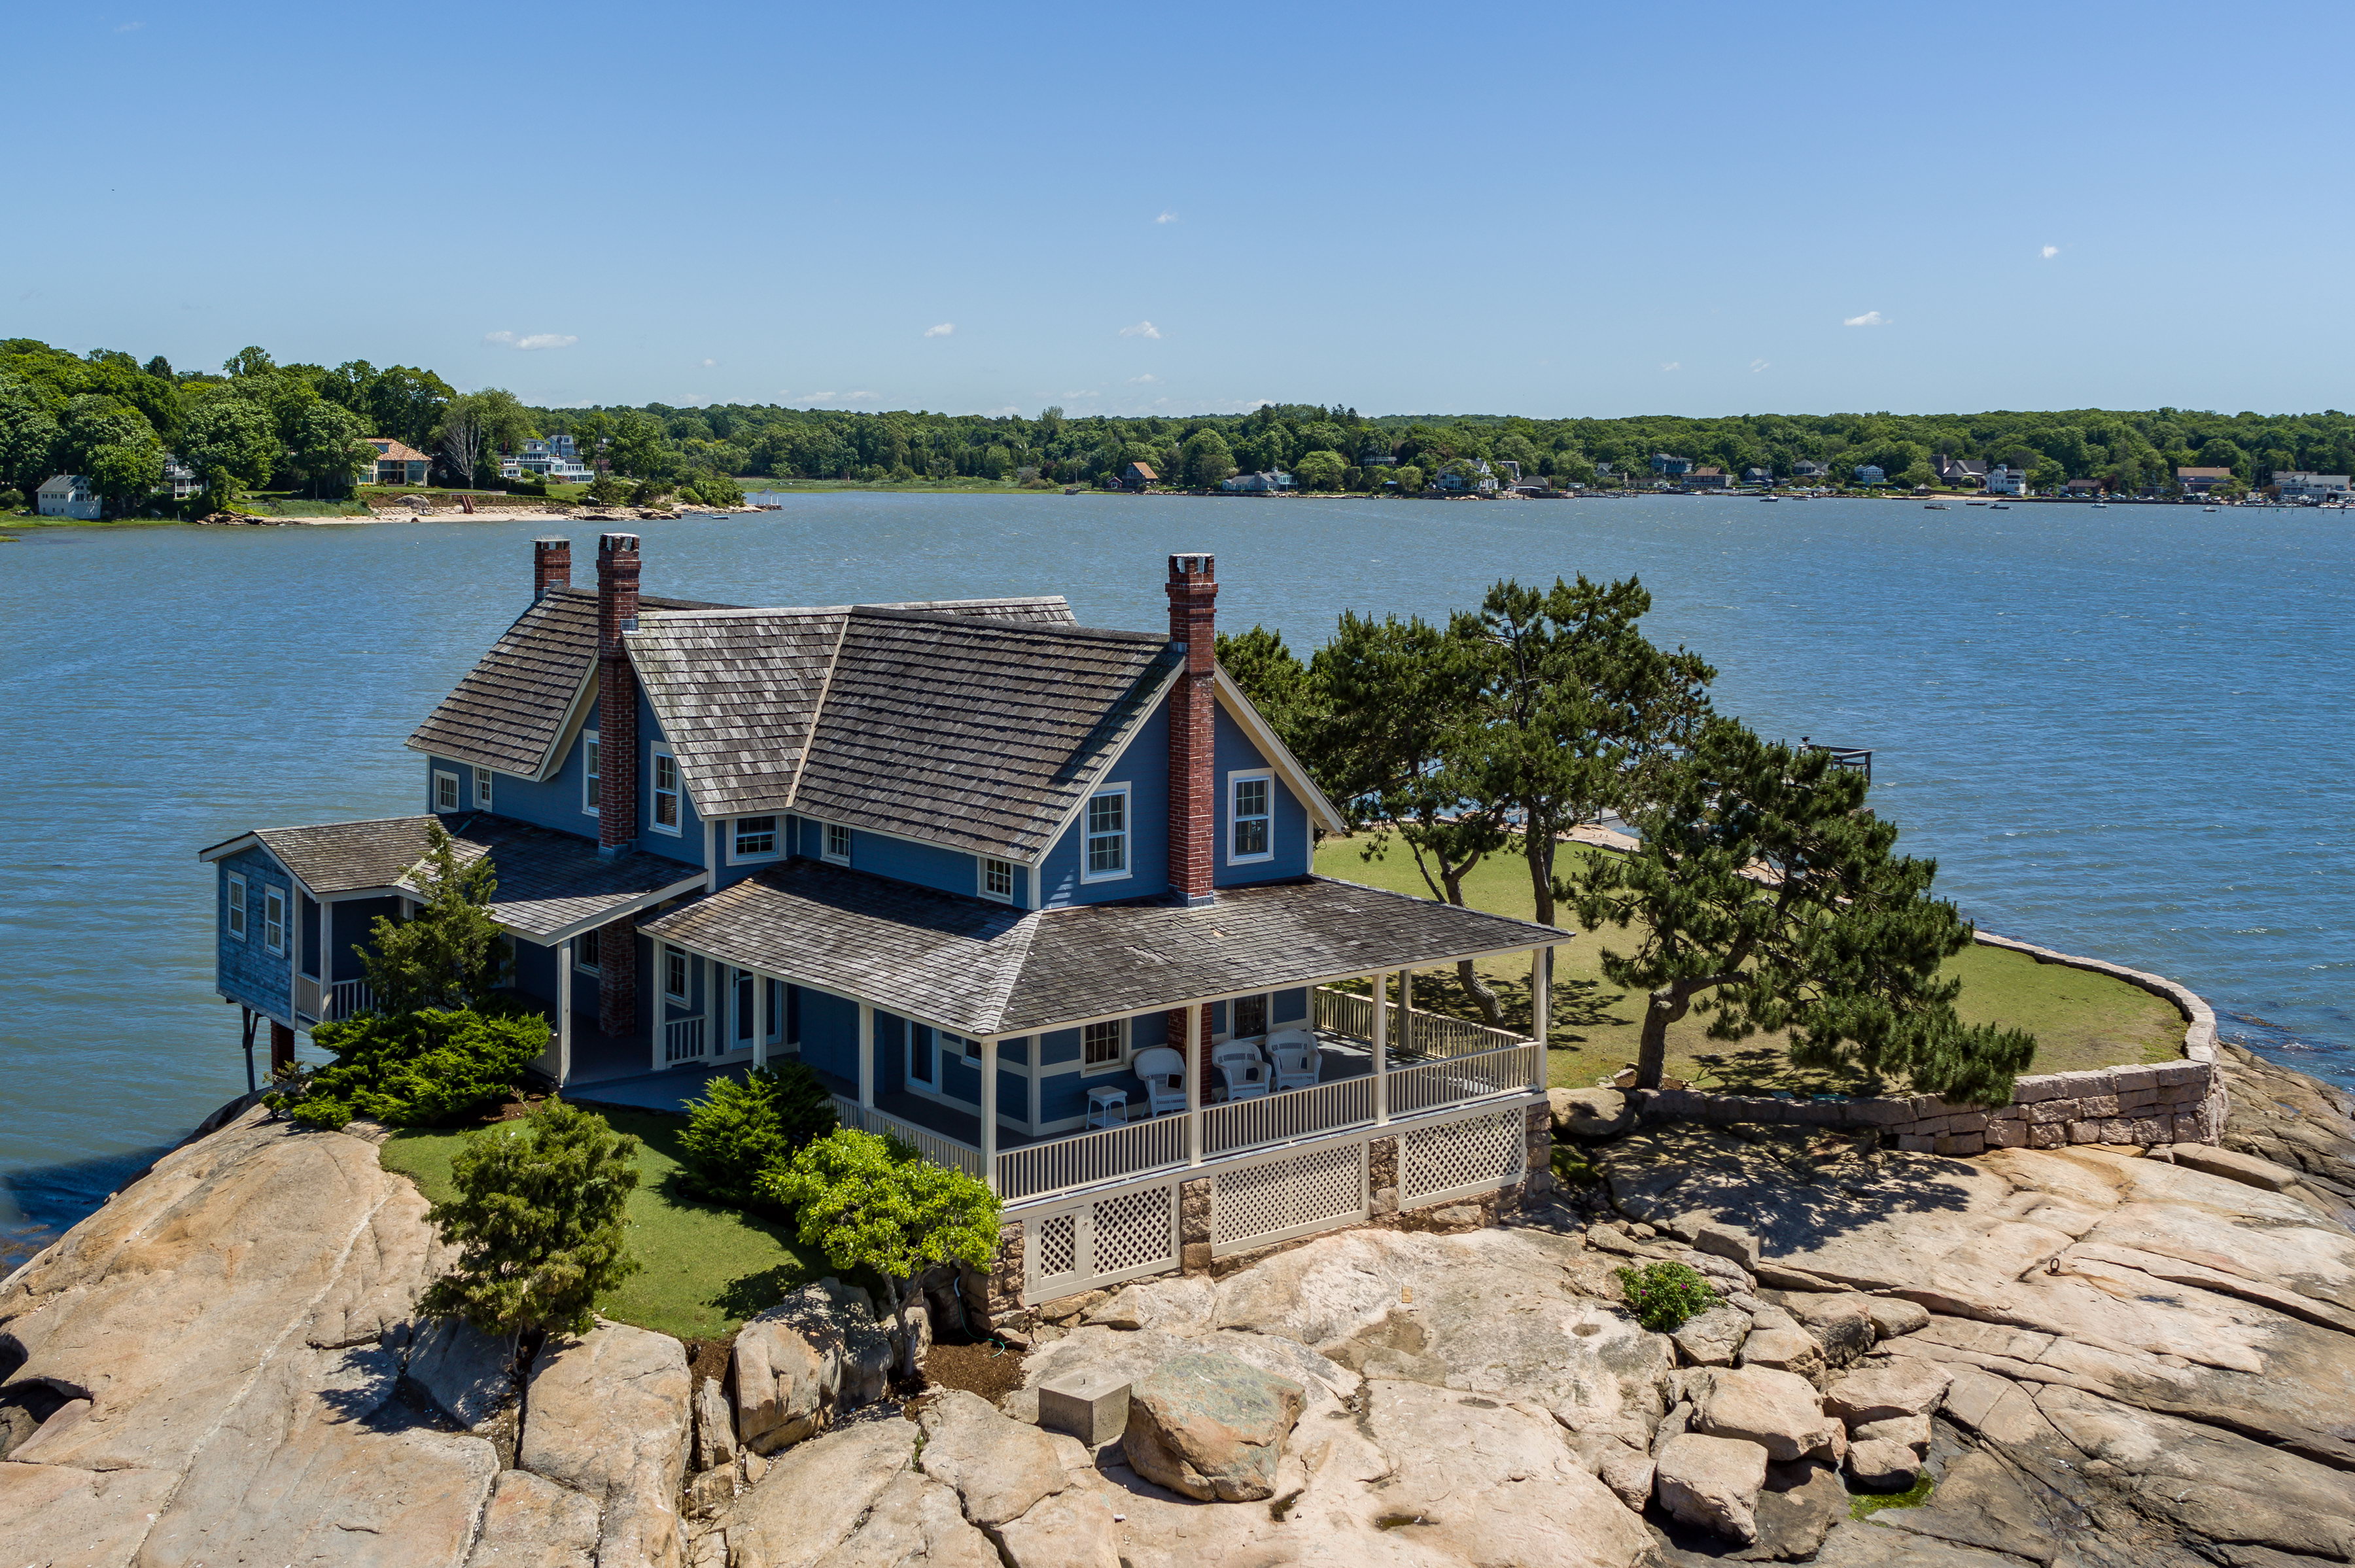 An exterior view of a cottage on a rocky island with water all around it. 